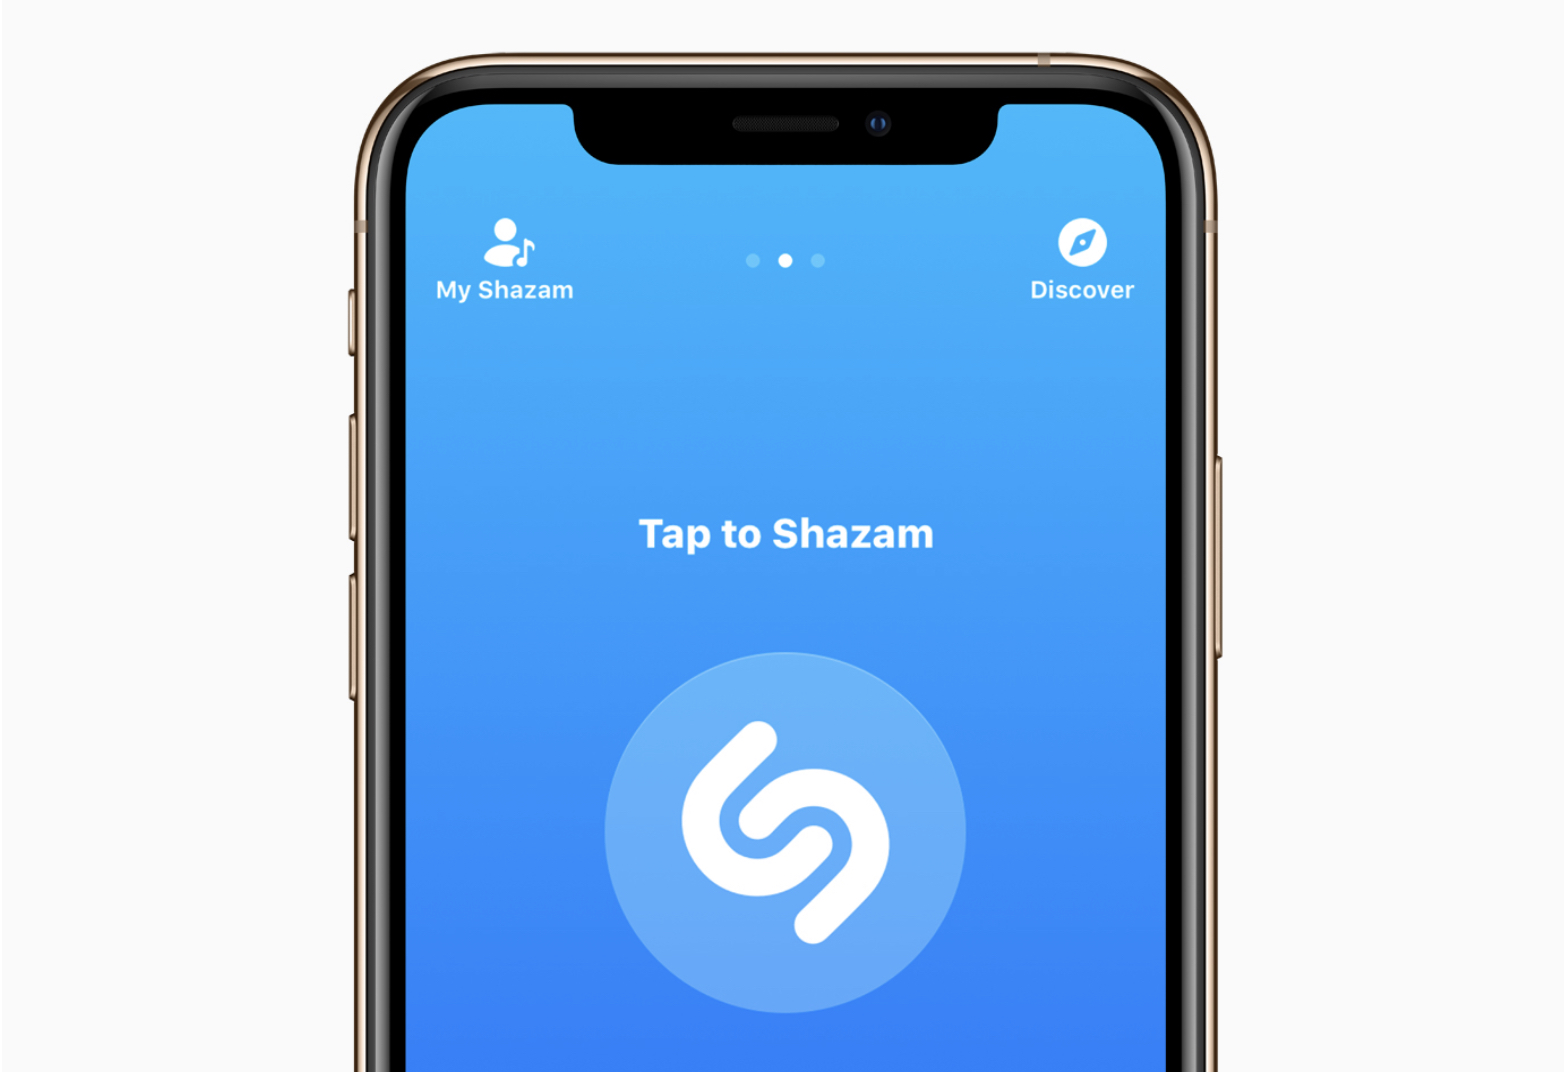 Apple acquisition meant that Shazam turned a profit in 2018